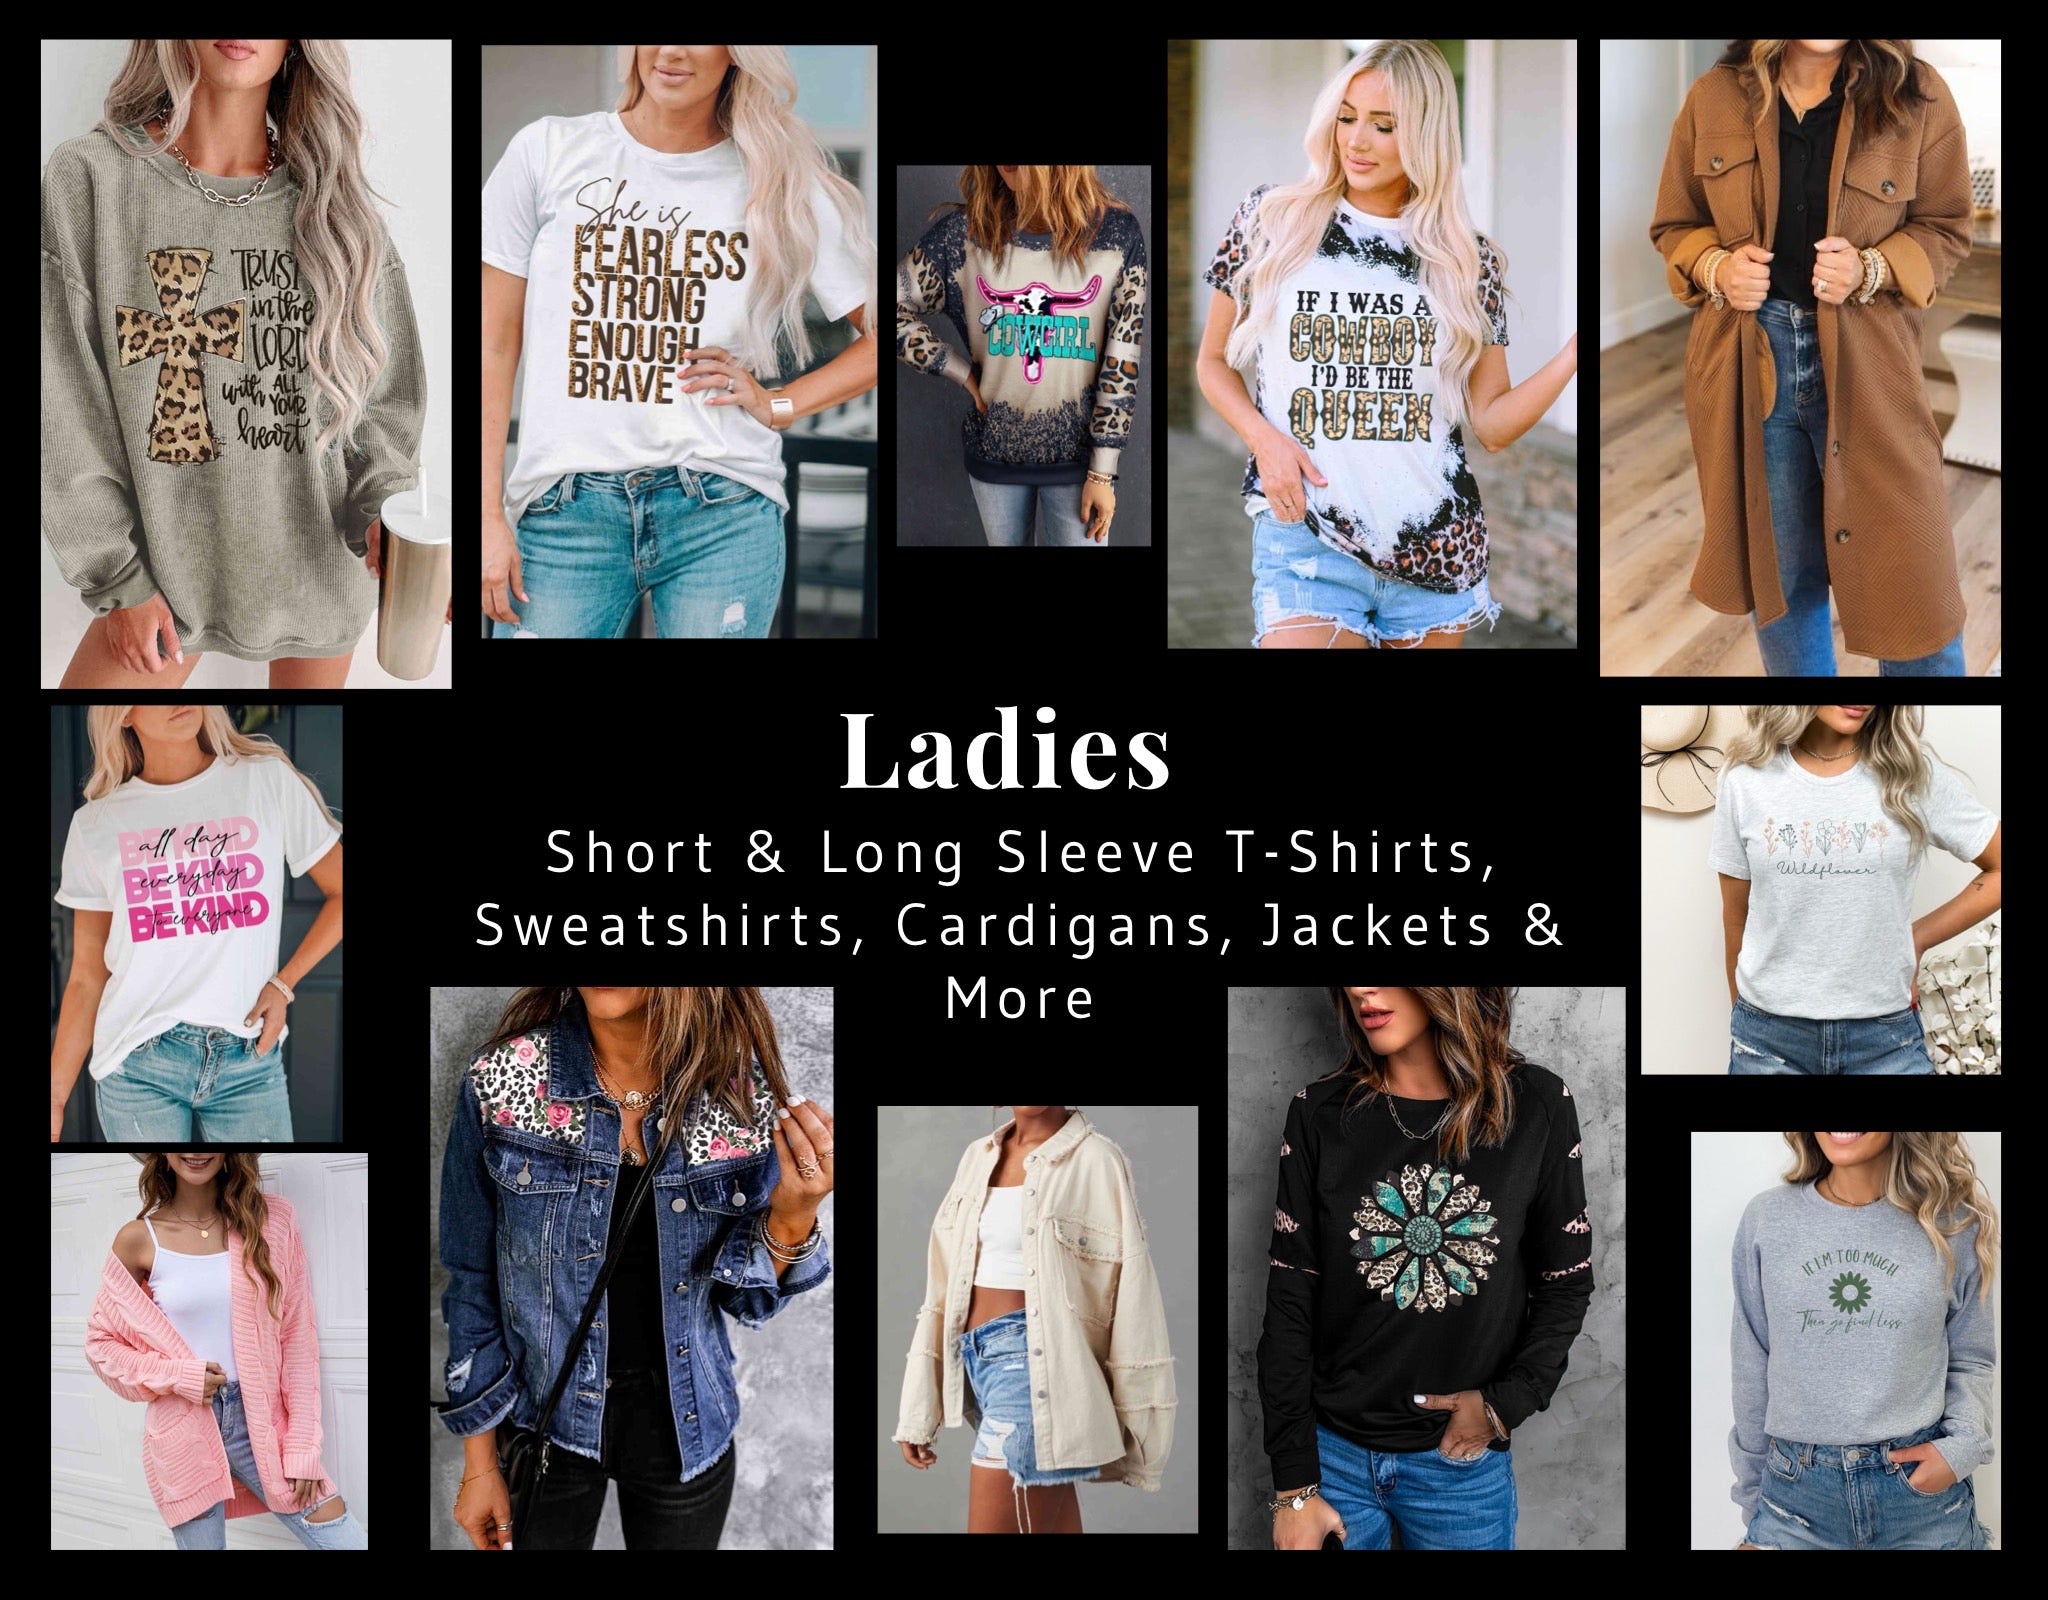 Shop all ladies tops, short and long sleeve tops, cardigans, jackets and more. Christian Clothing for women